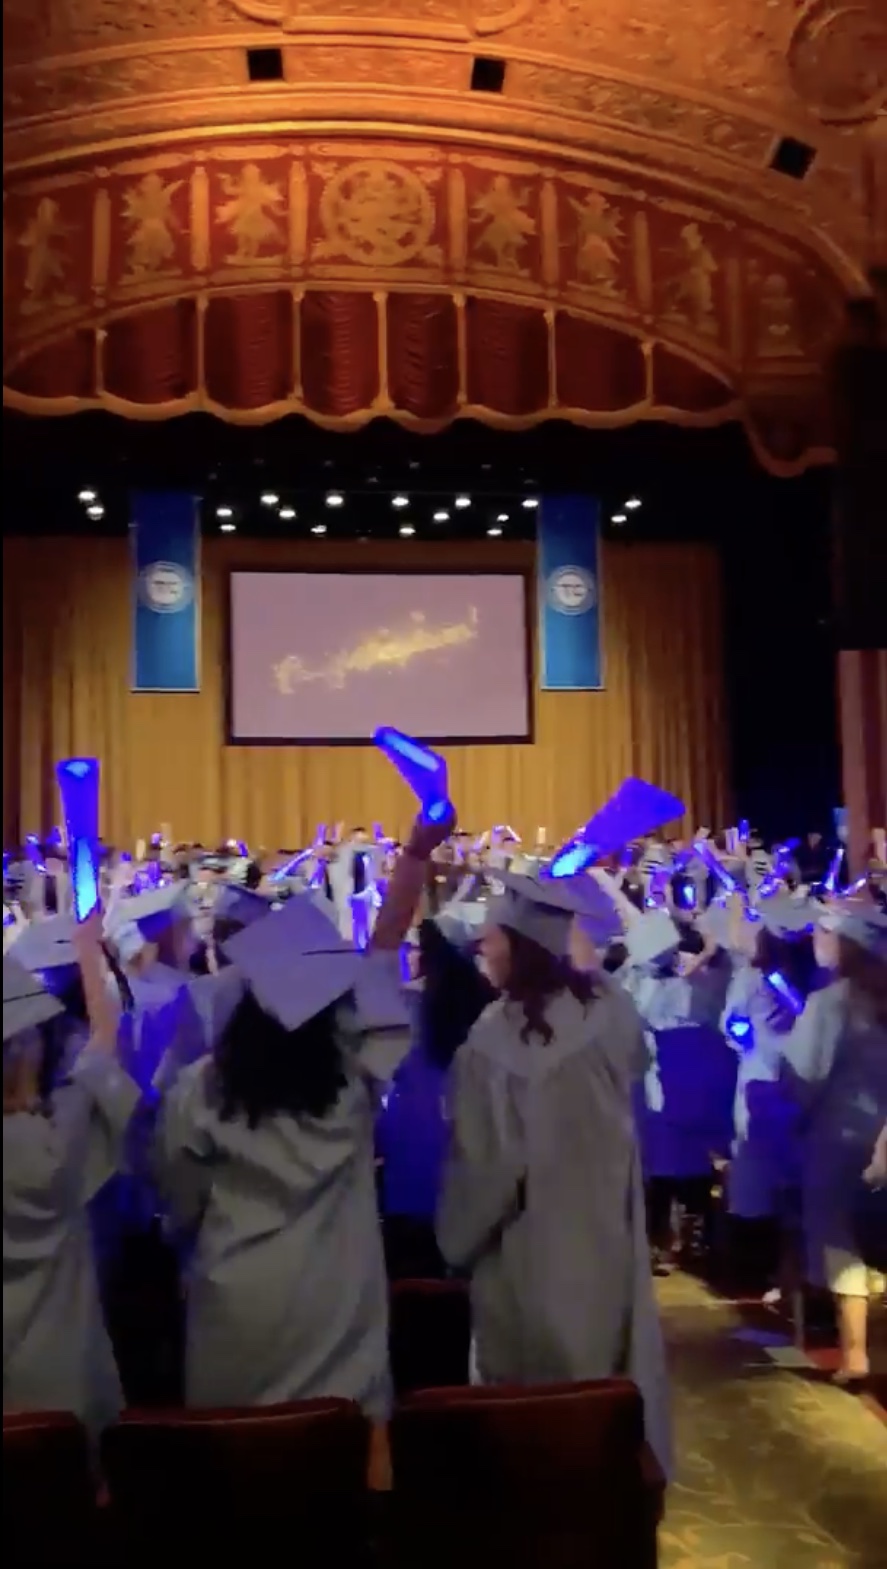 Graduates celebrating and cheering in the venue